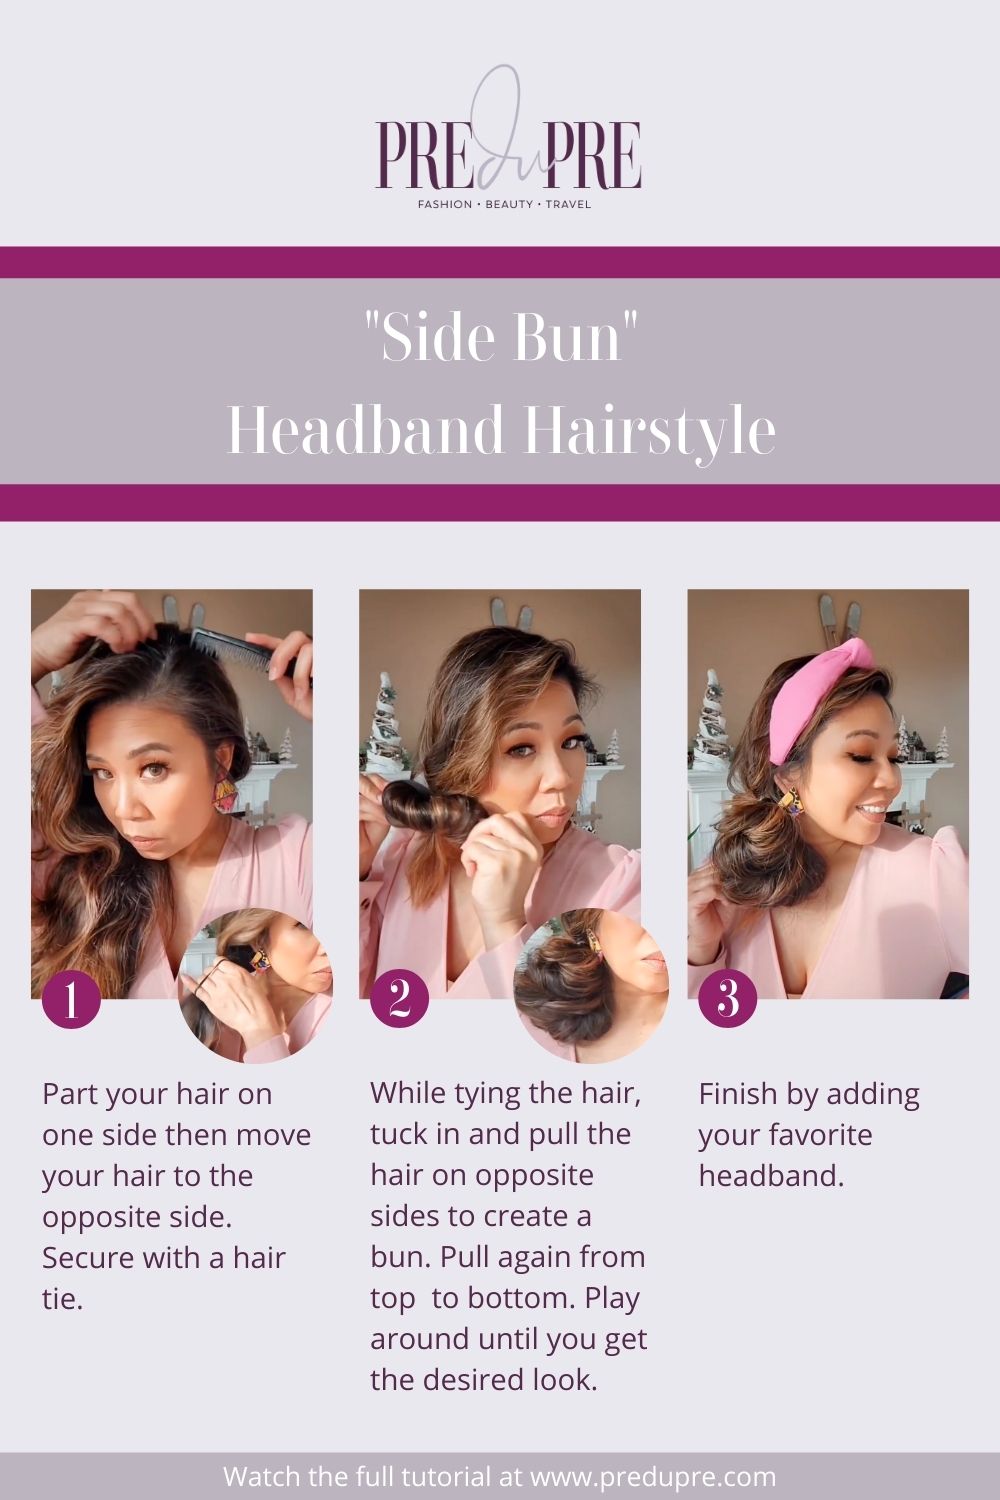 Woman parts hair on one side, then pulls all her hair on the opposite side.  She secure het hair with a hair tie, but before she finishes, she creates a bun to finish the hair tie.  She then pulls it from side to side, then from top to bottom.  Play around until you get the desired look and finish with headband.